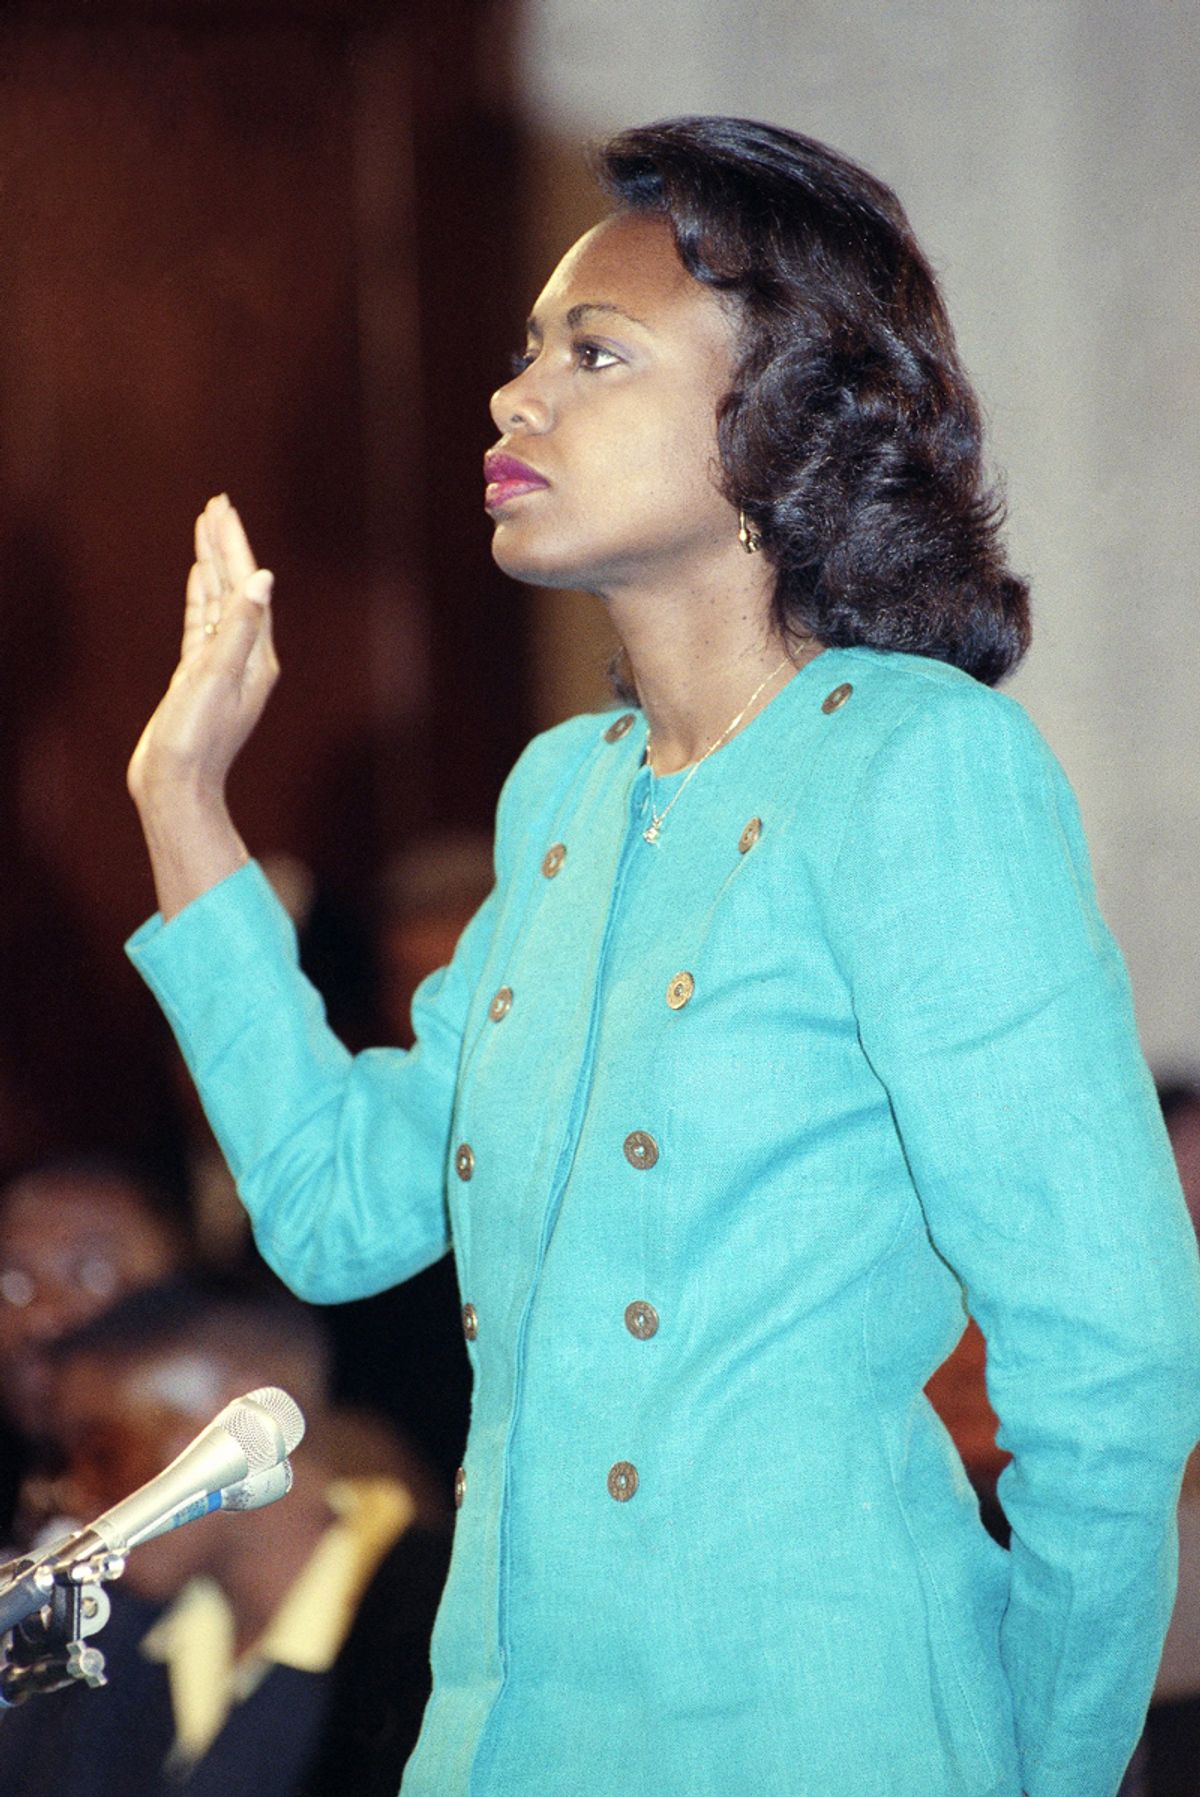 FILE - University of Oklahoma law professor Anita Hill is sworn in, in the Caucus Room before testifying before the Senate Judiciary Committee on Capitol Hill in Washington, in this Oct. 11, 1991 file photo. Virginia Thomas said in a statement Tuesday Oct. 19, 2010 that she was "extending an olive branch" to Hill, now a Brandeis University professor, in a voicemail message left over the weekend asking Anita Hill to apologize for accusing the justice of sexually harassing her. (AP Photo/Greg Gibson, File) (Greg Gibson)